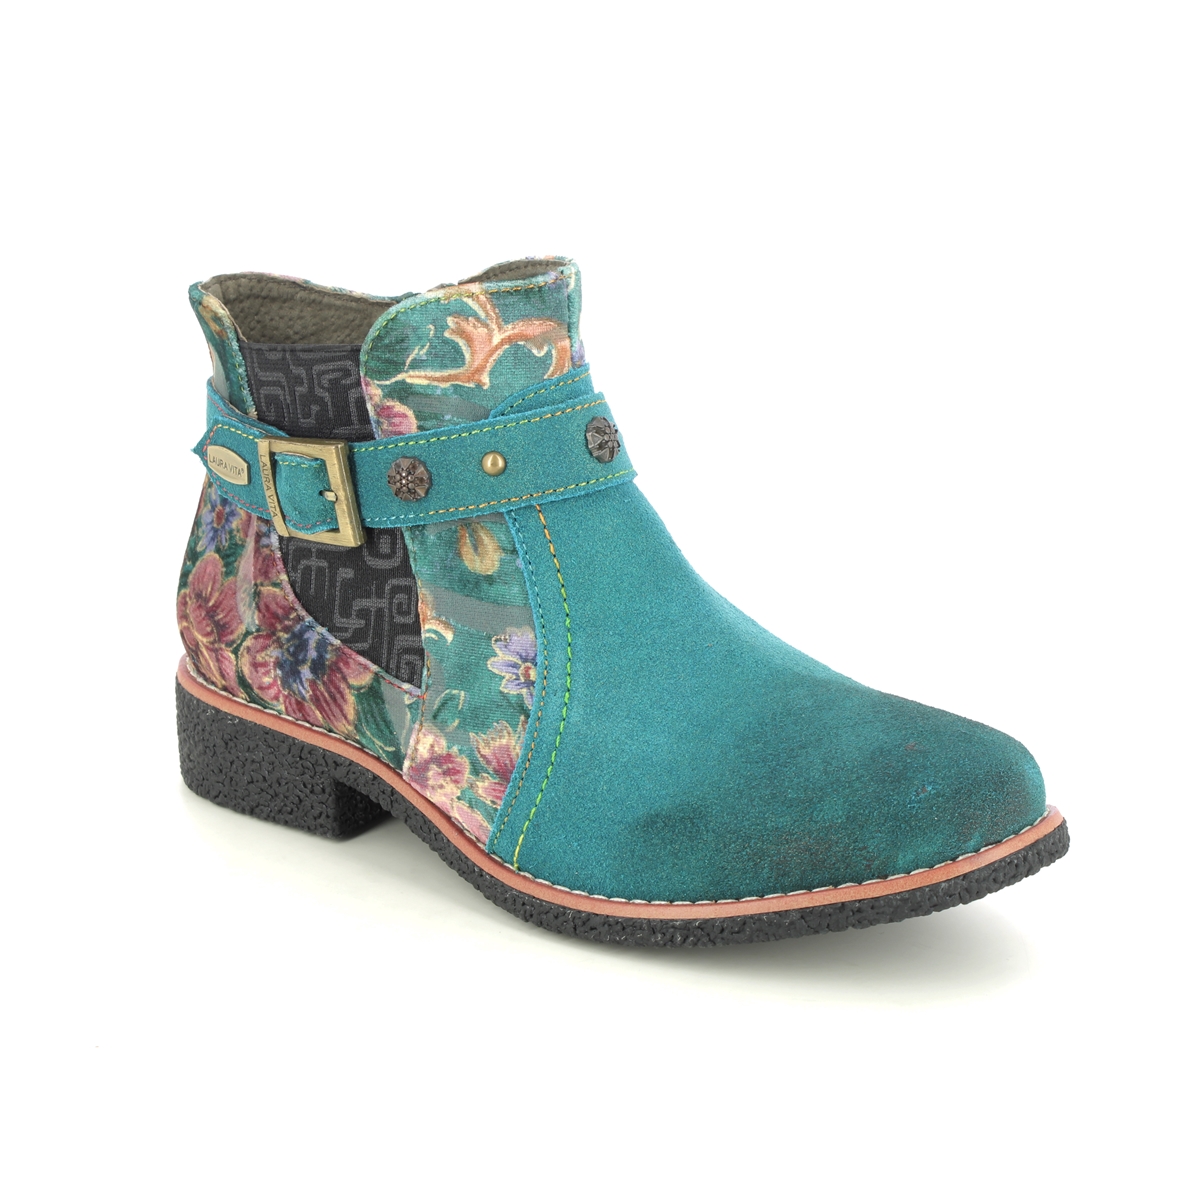 Laura Vita - Cocralieo 04 (Turquoise Leather) 4195-94 In Size 37 In Floral Turquoise Leather